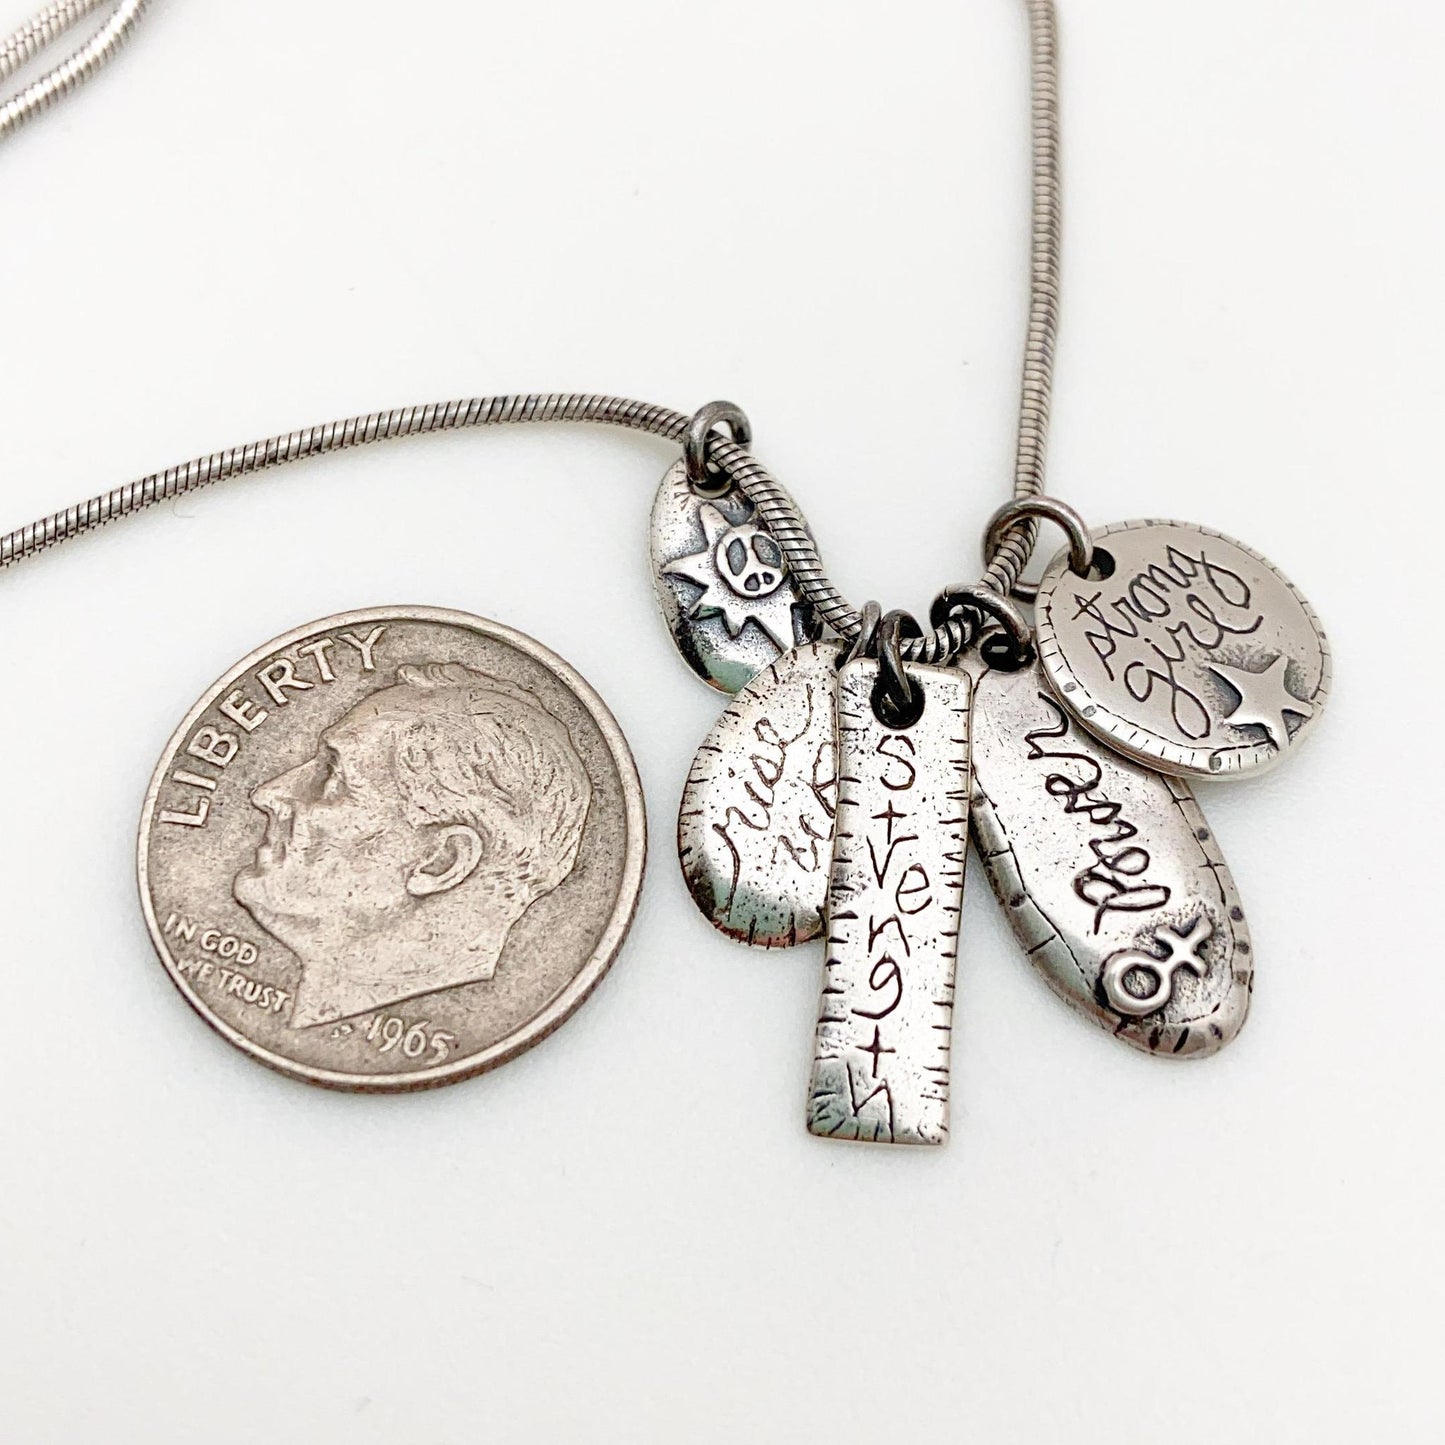 Necklace - "Strong Girl" Charms - Sterling